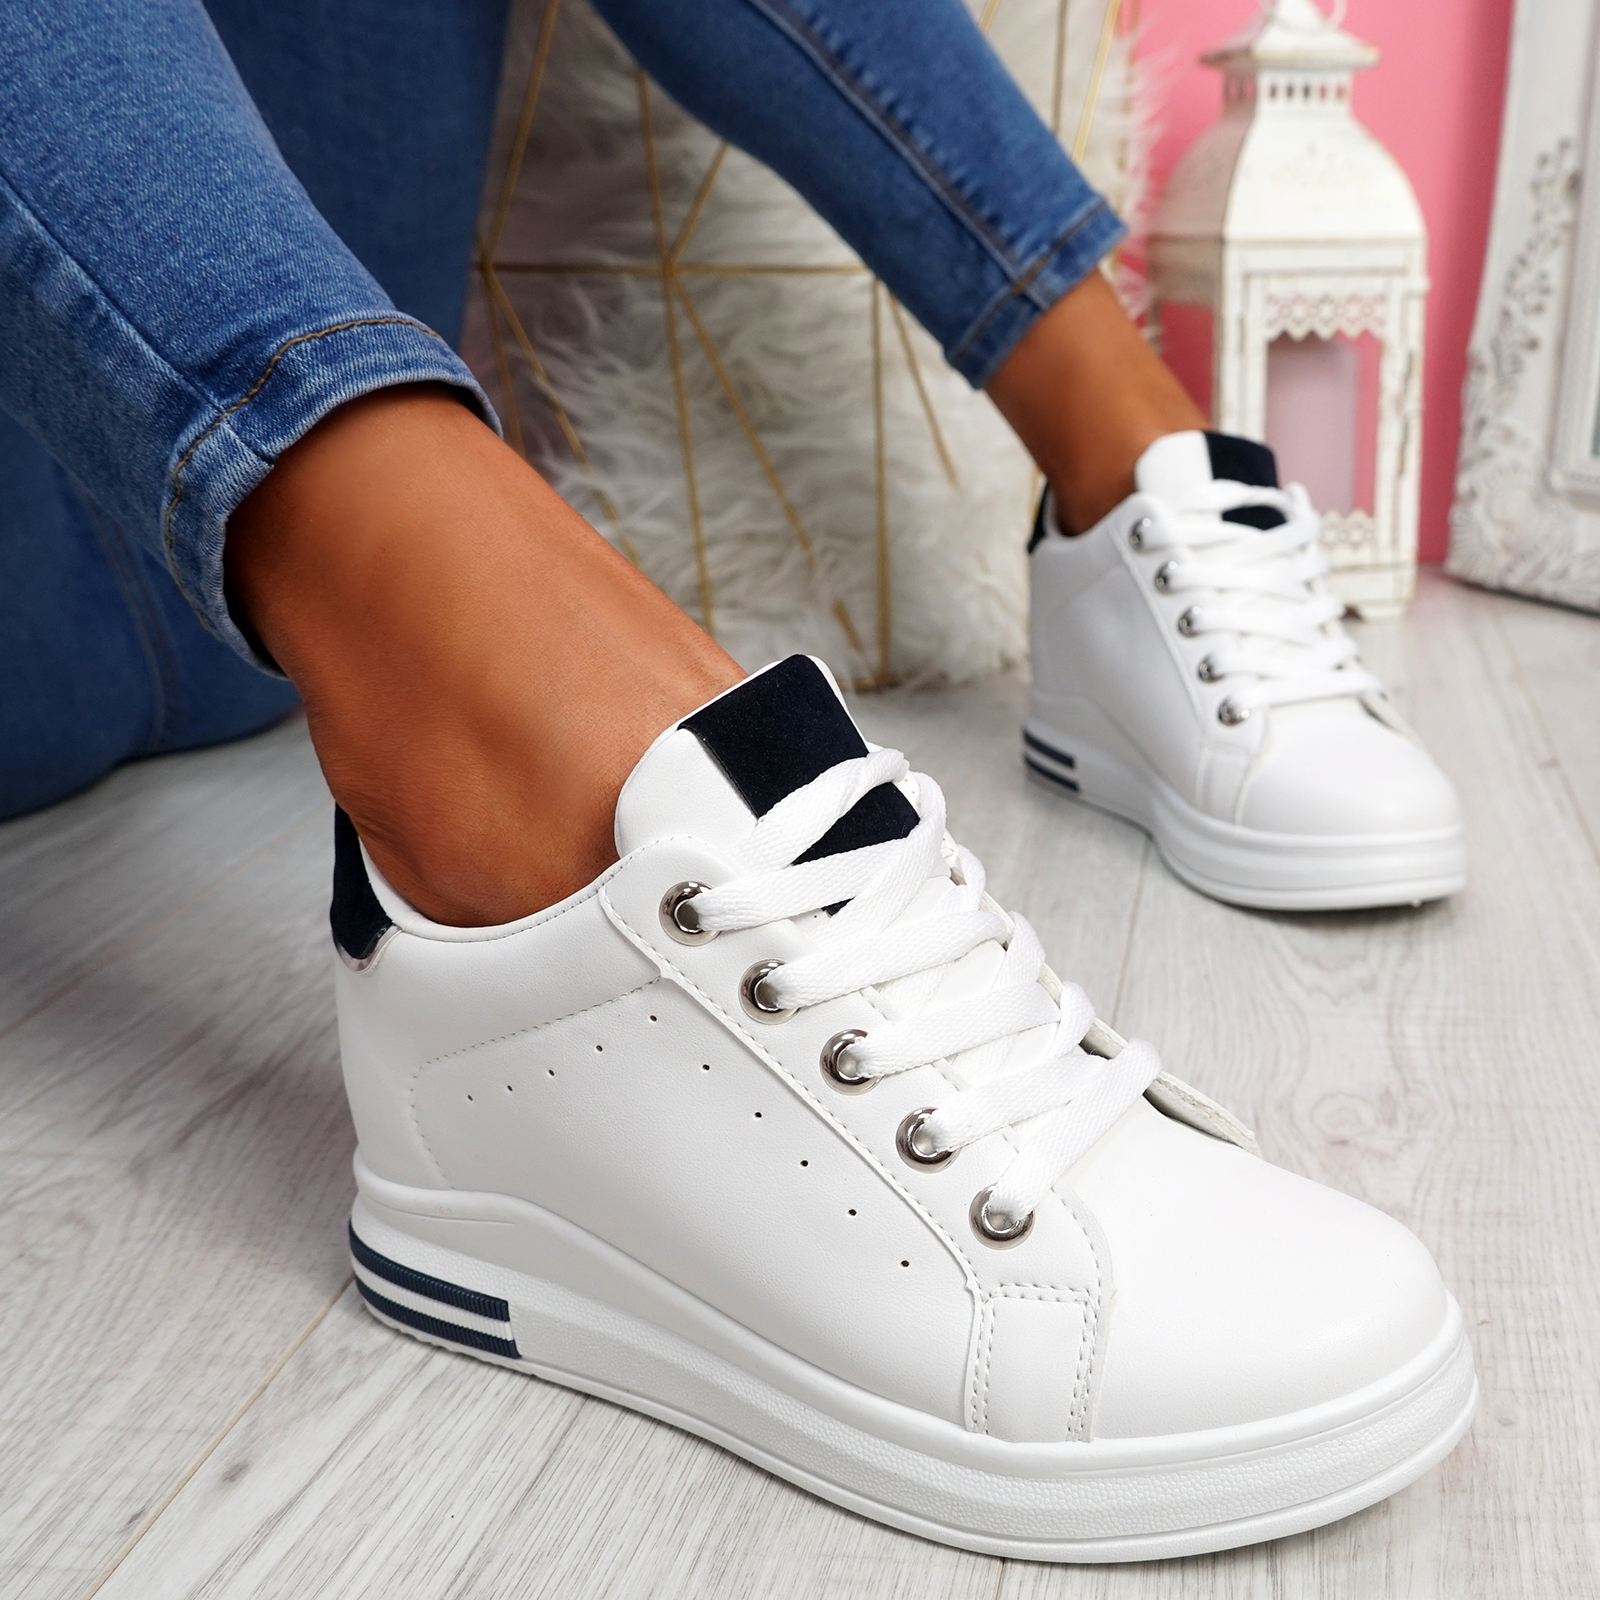 36 Womens White Lace Up Platform Plimsolls Trainers Sneakers Shoes Size UK 3